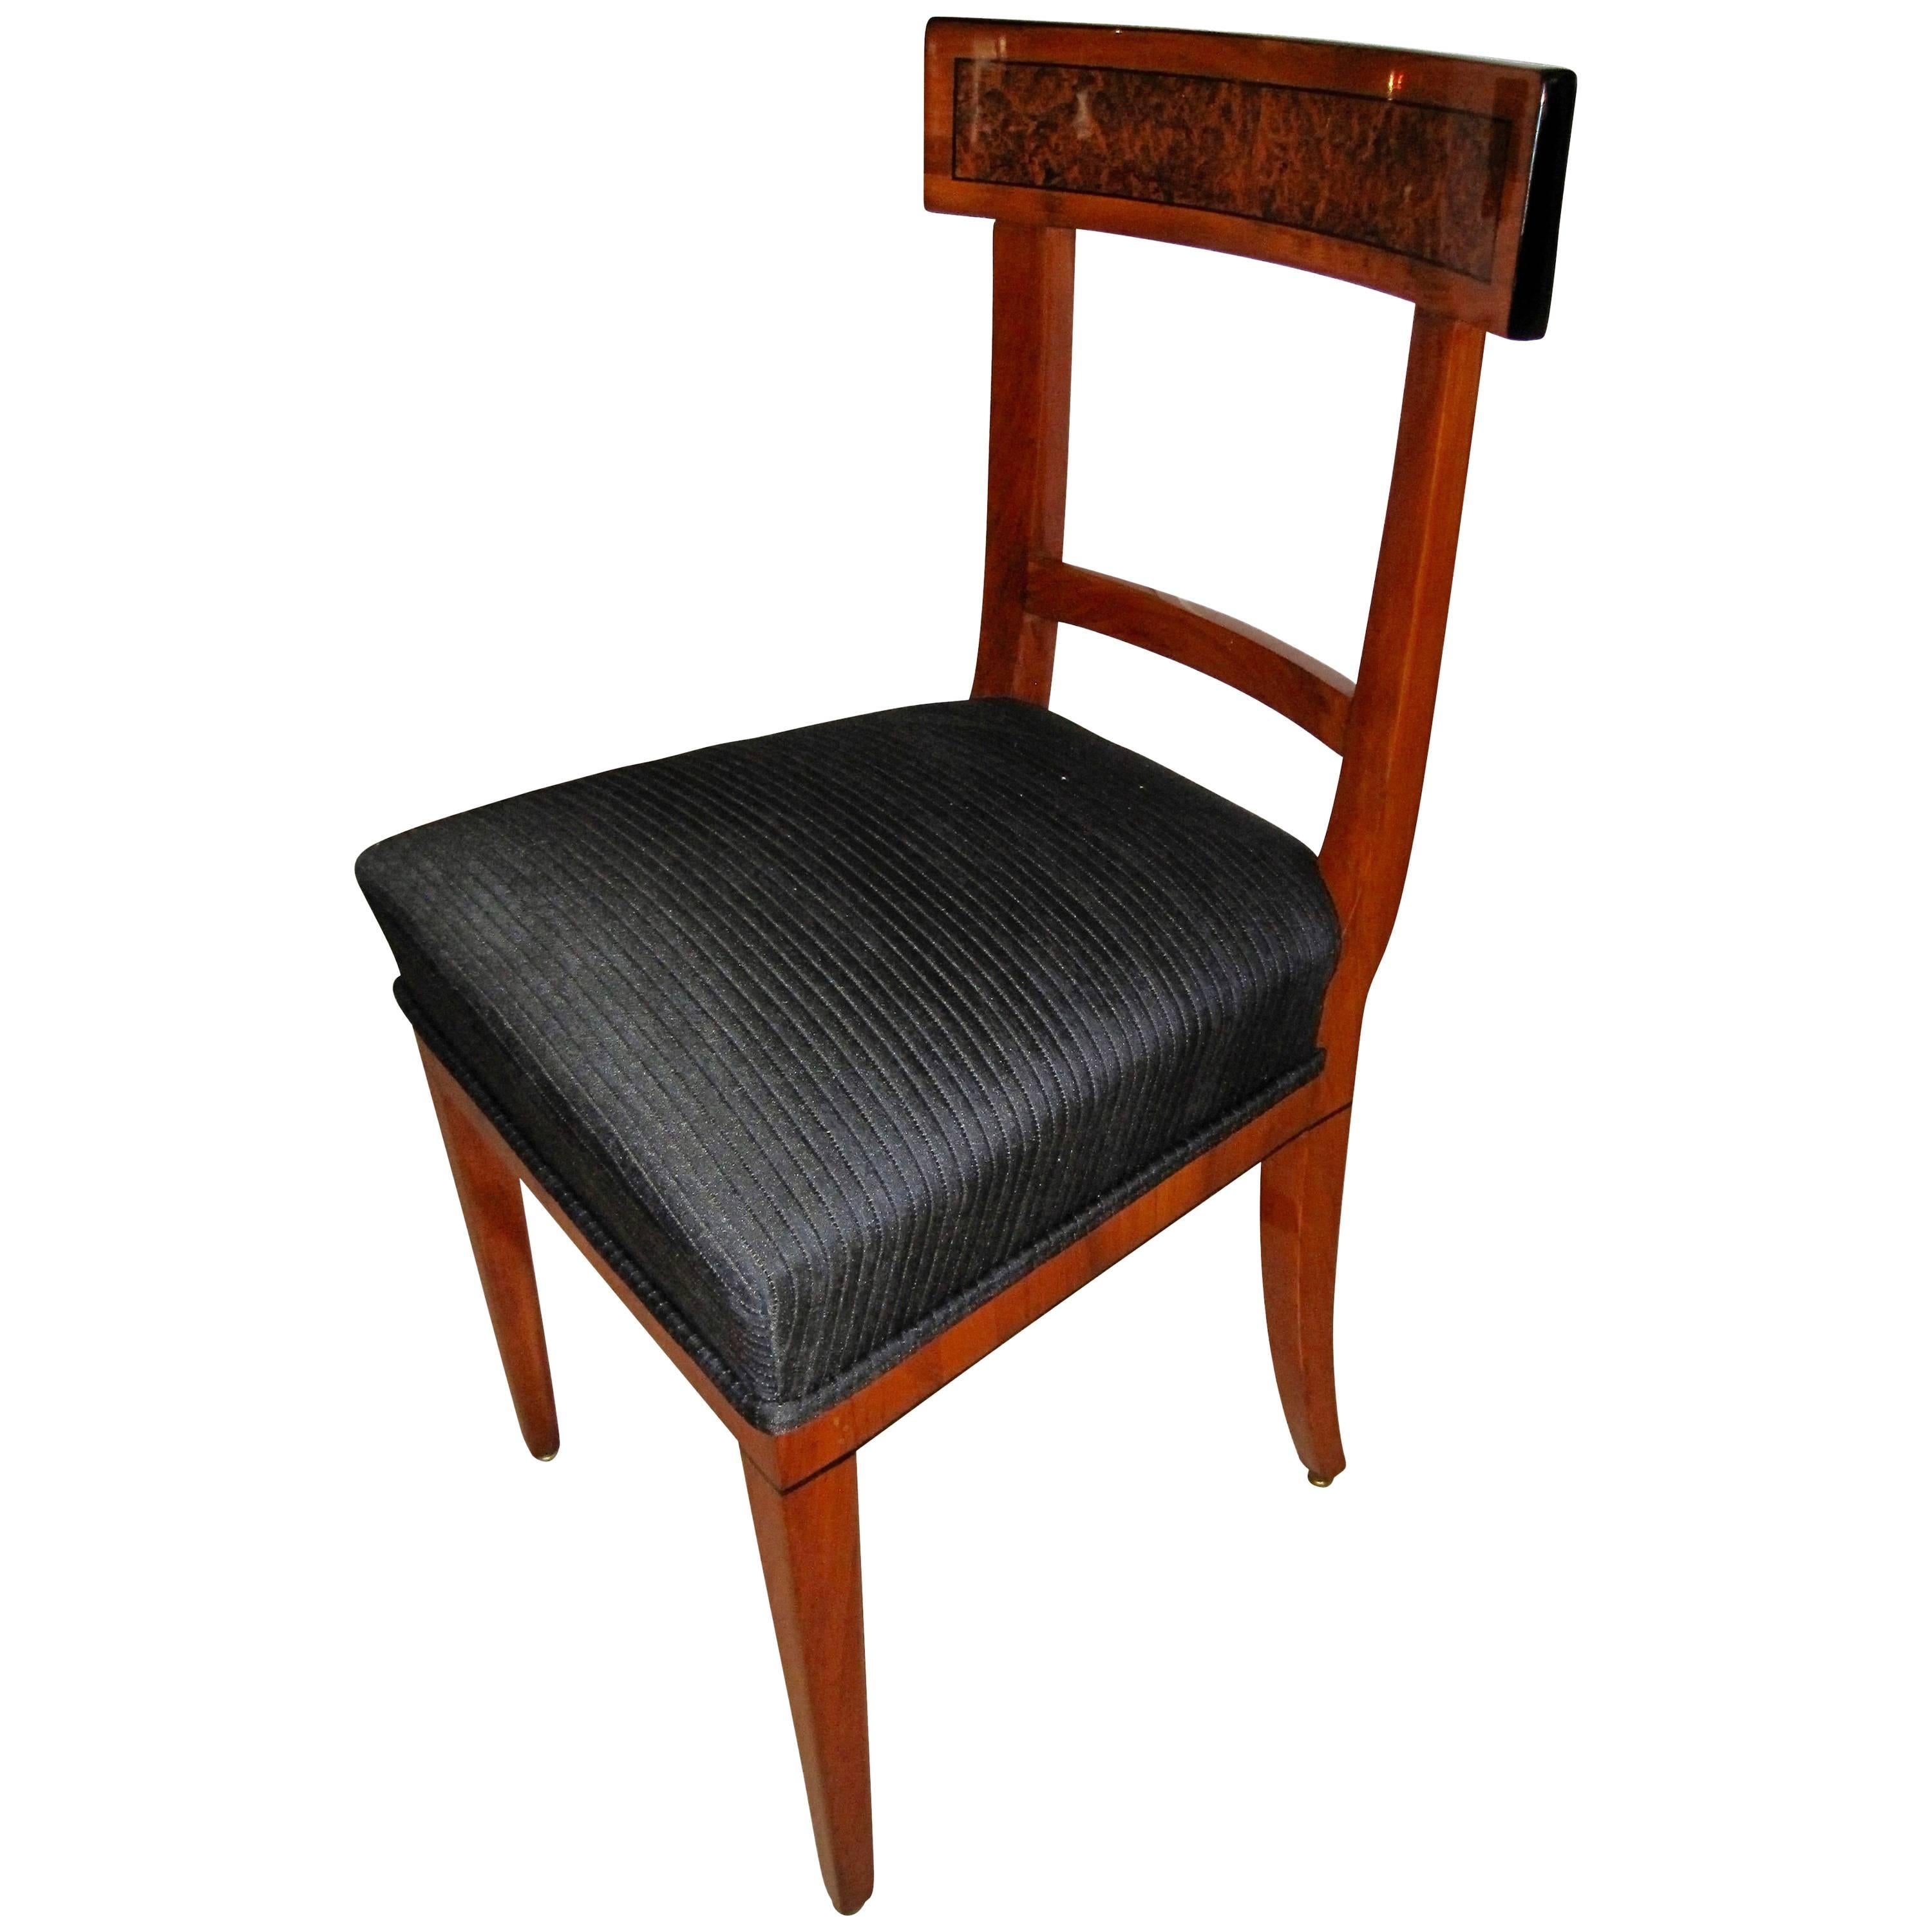 Beautiful and elegant single Biedermeier chair. 
The backrest and frame are veneered with cherry wood and birch roots surrounded by an ebony inlays. 
The legs and back support are cherry solid wood. The sides of the backrest have been